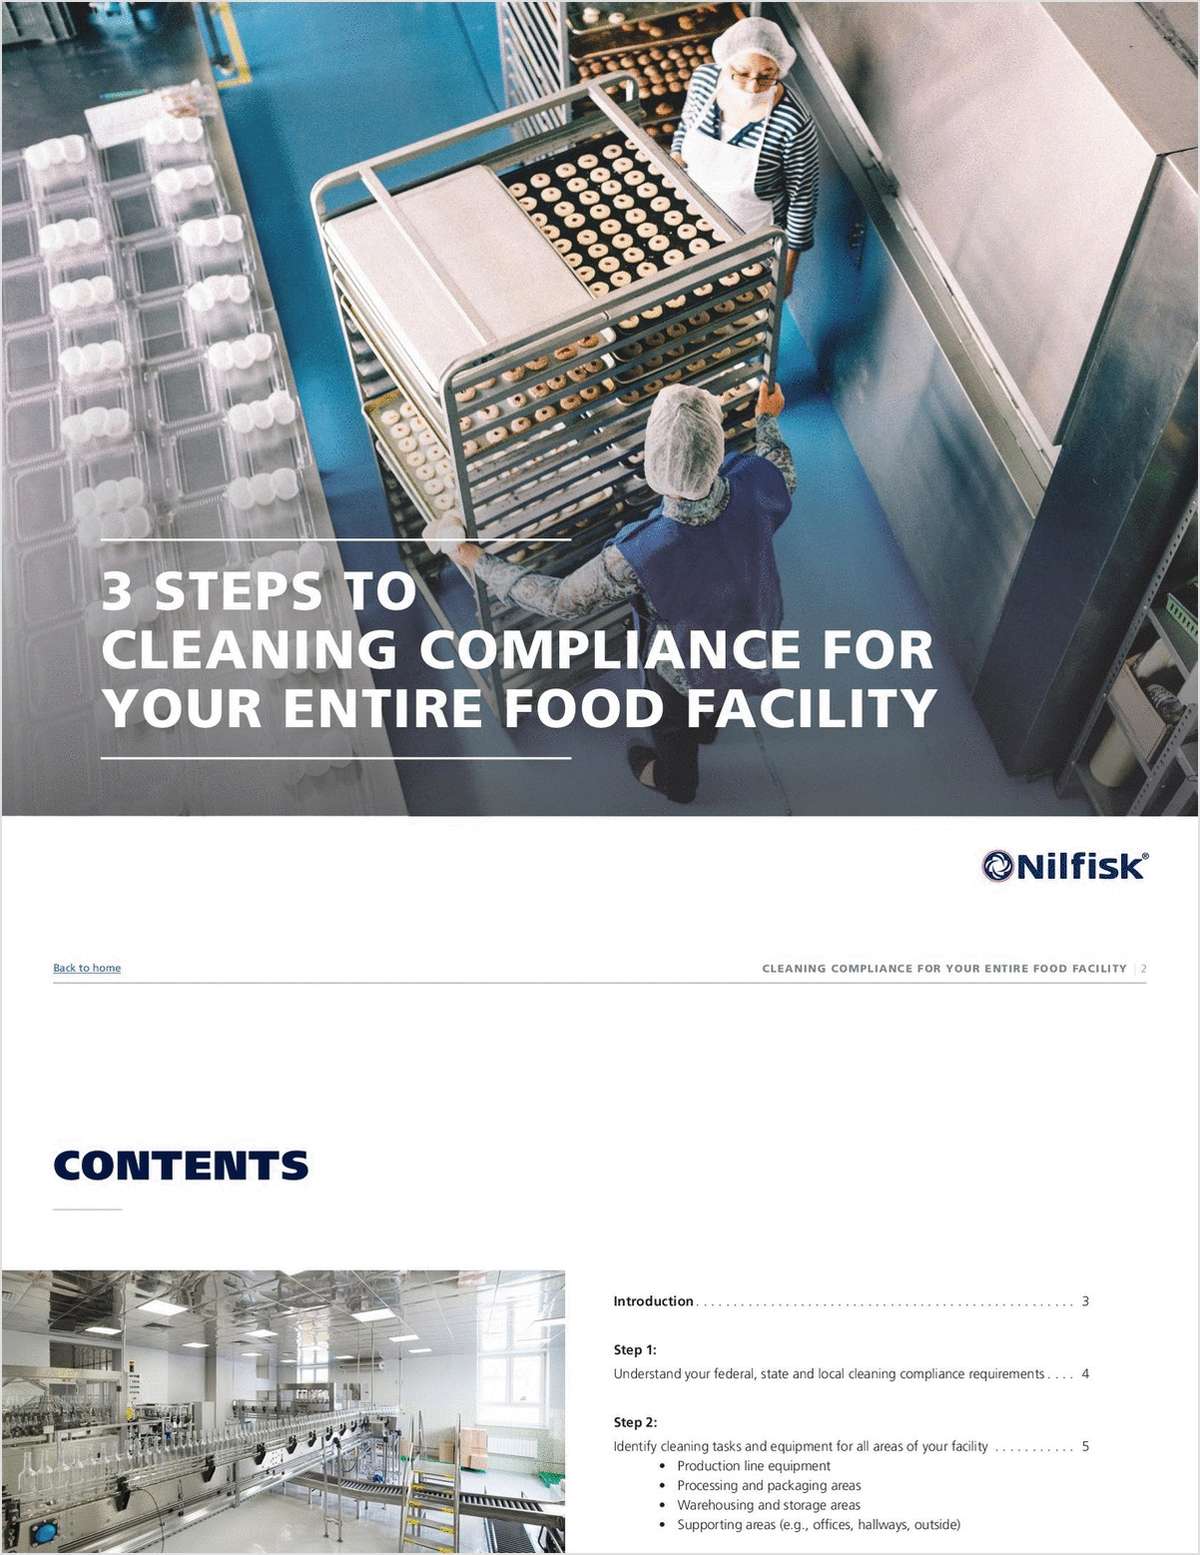 3 Steps to Cleaning Compliance for Your Entire Food Facility